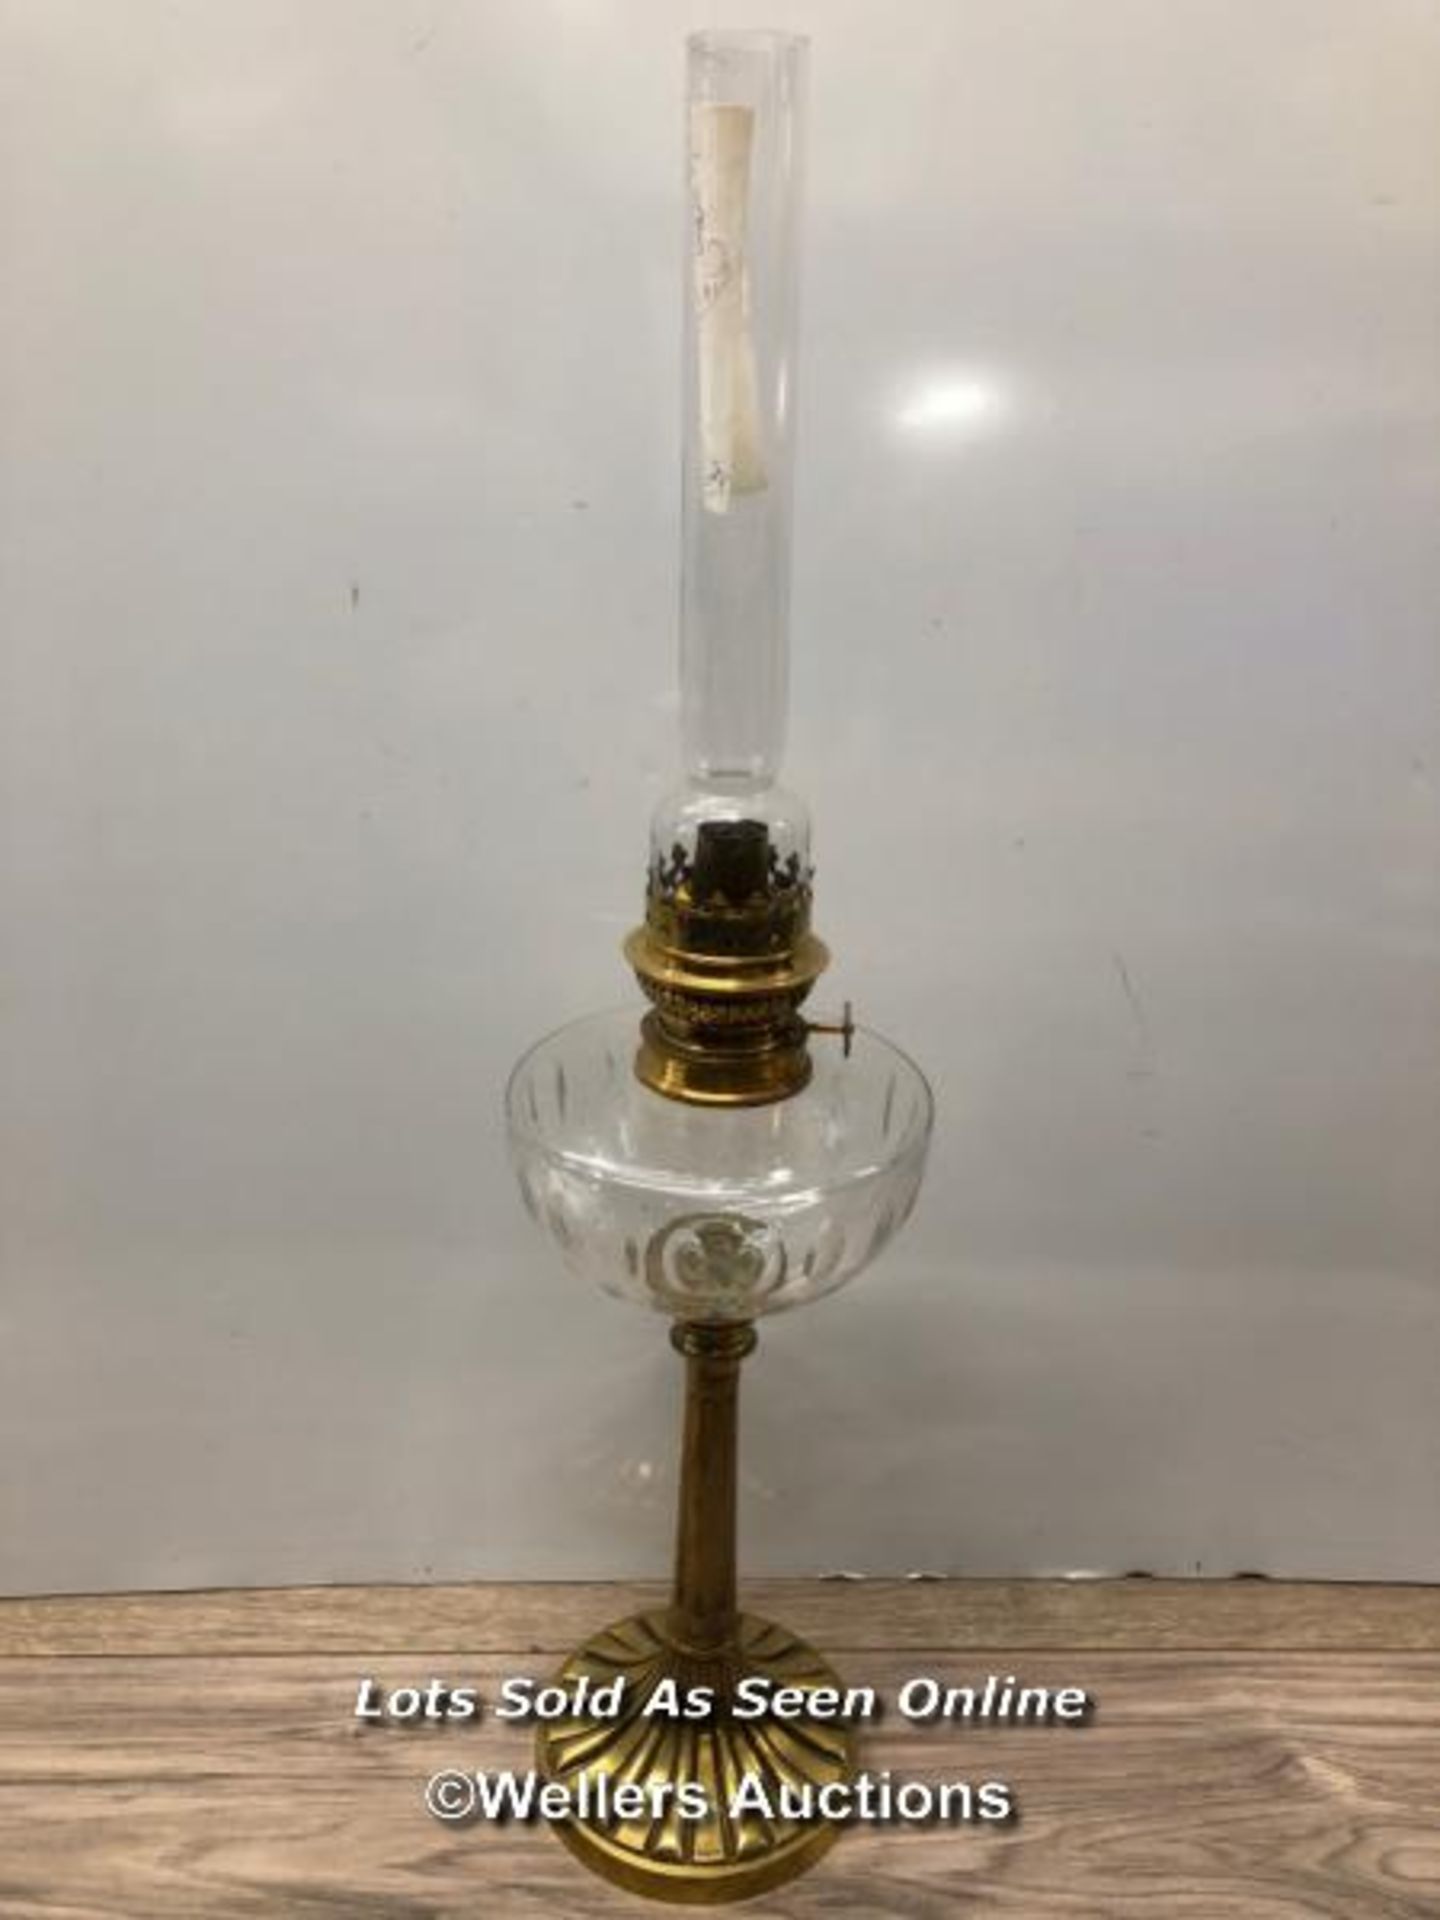 *TALL AND SLENDER OIL LAMP, GLASS RESERVOIR AND BRASS BASE